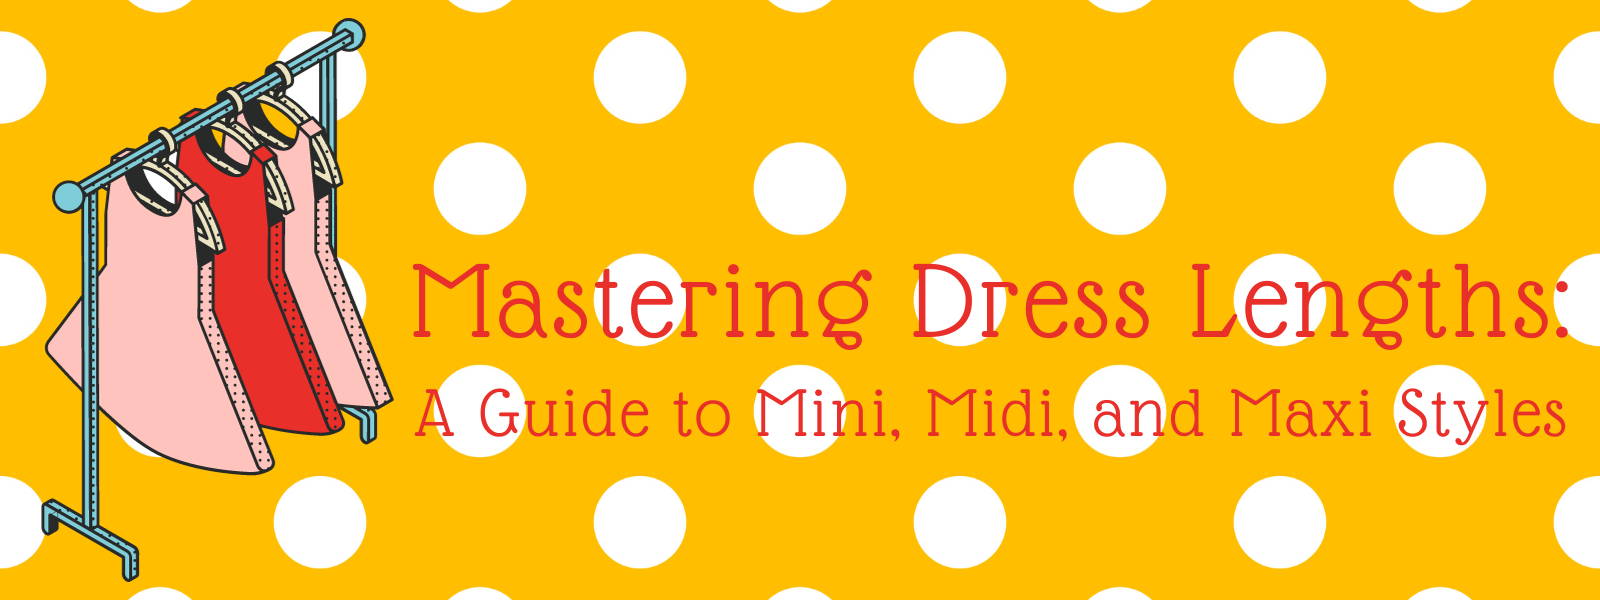 Mastering Dress Lengths: A Guide to Mini, Midi, and Maxi Styles